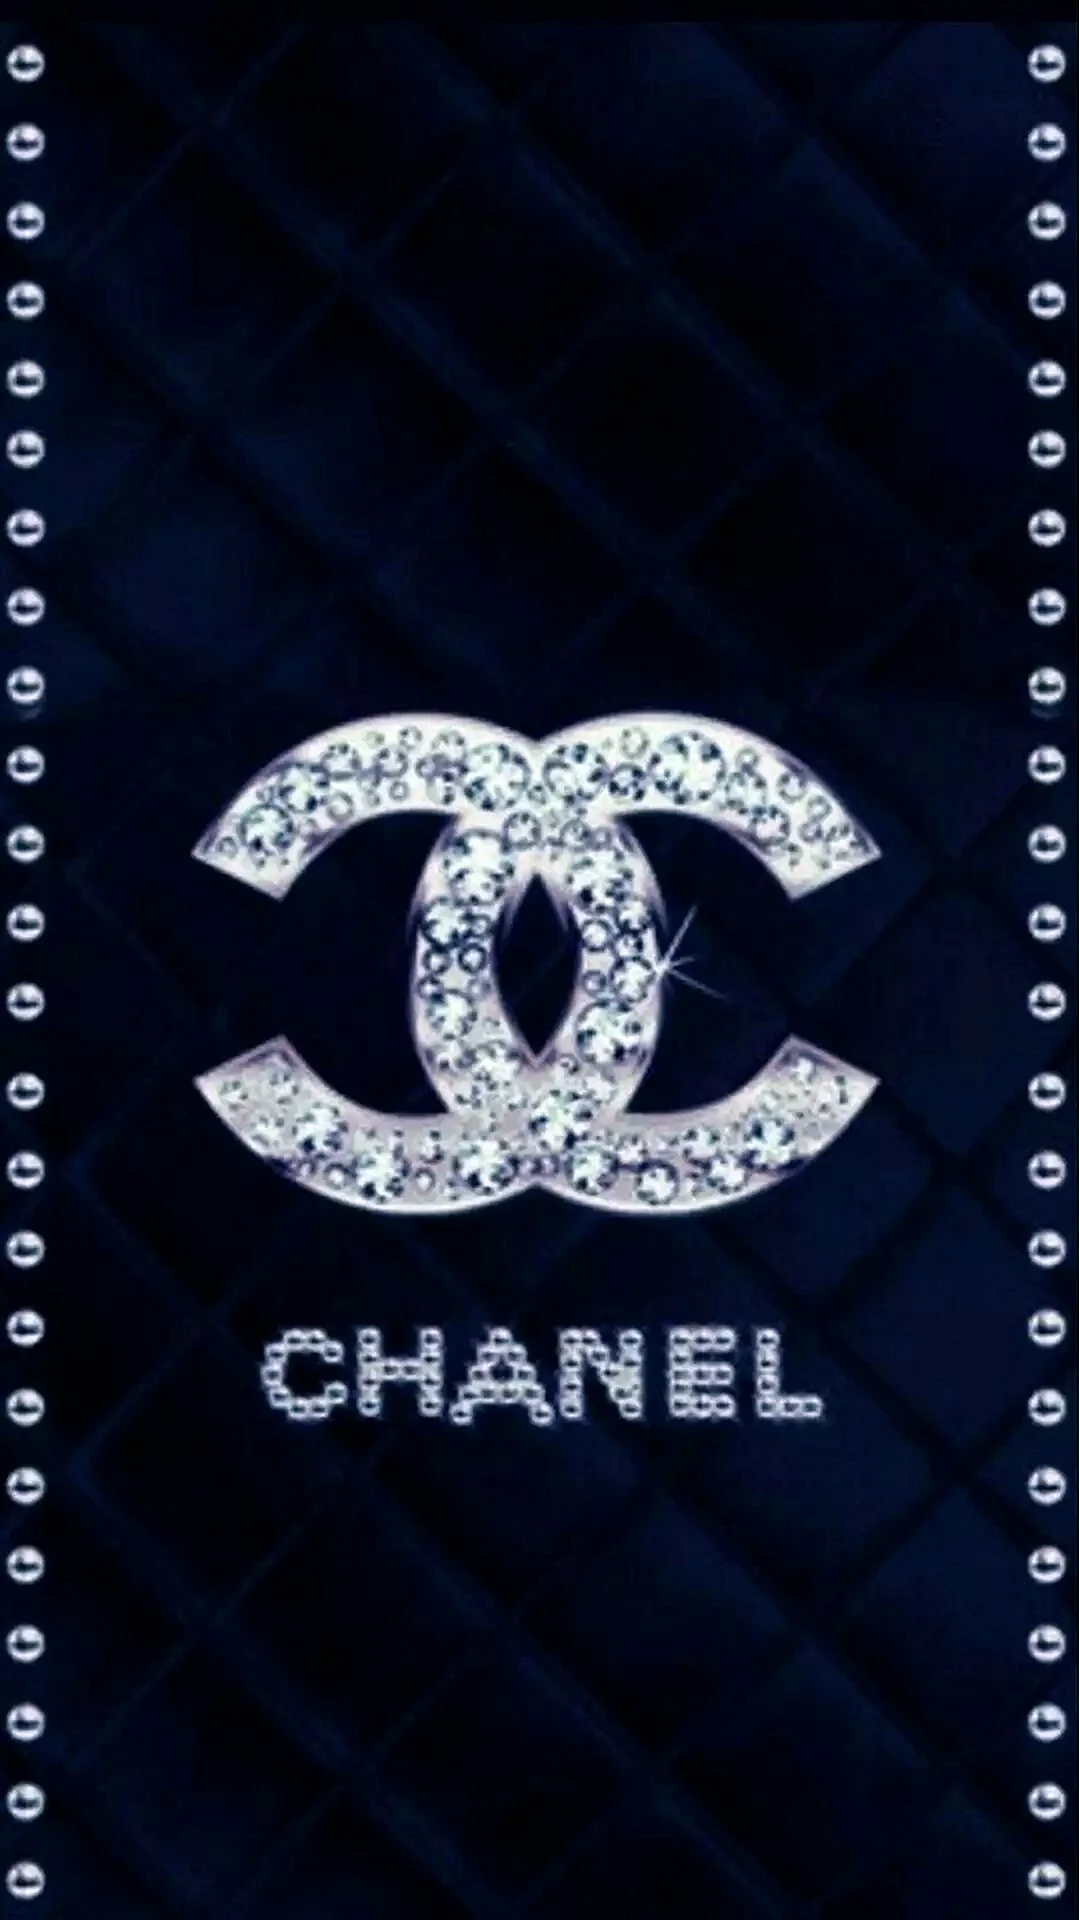 Chanel iPhone Wallpaper For iPhone